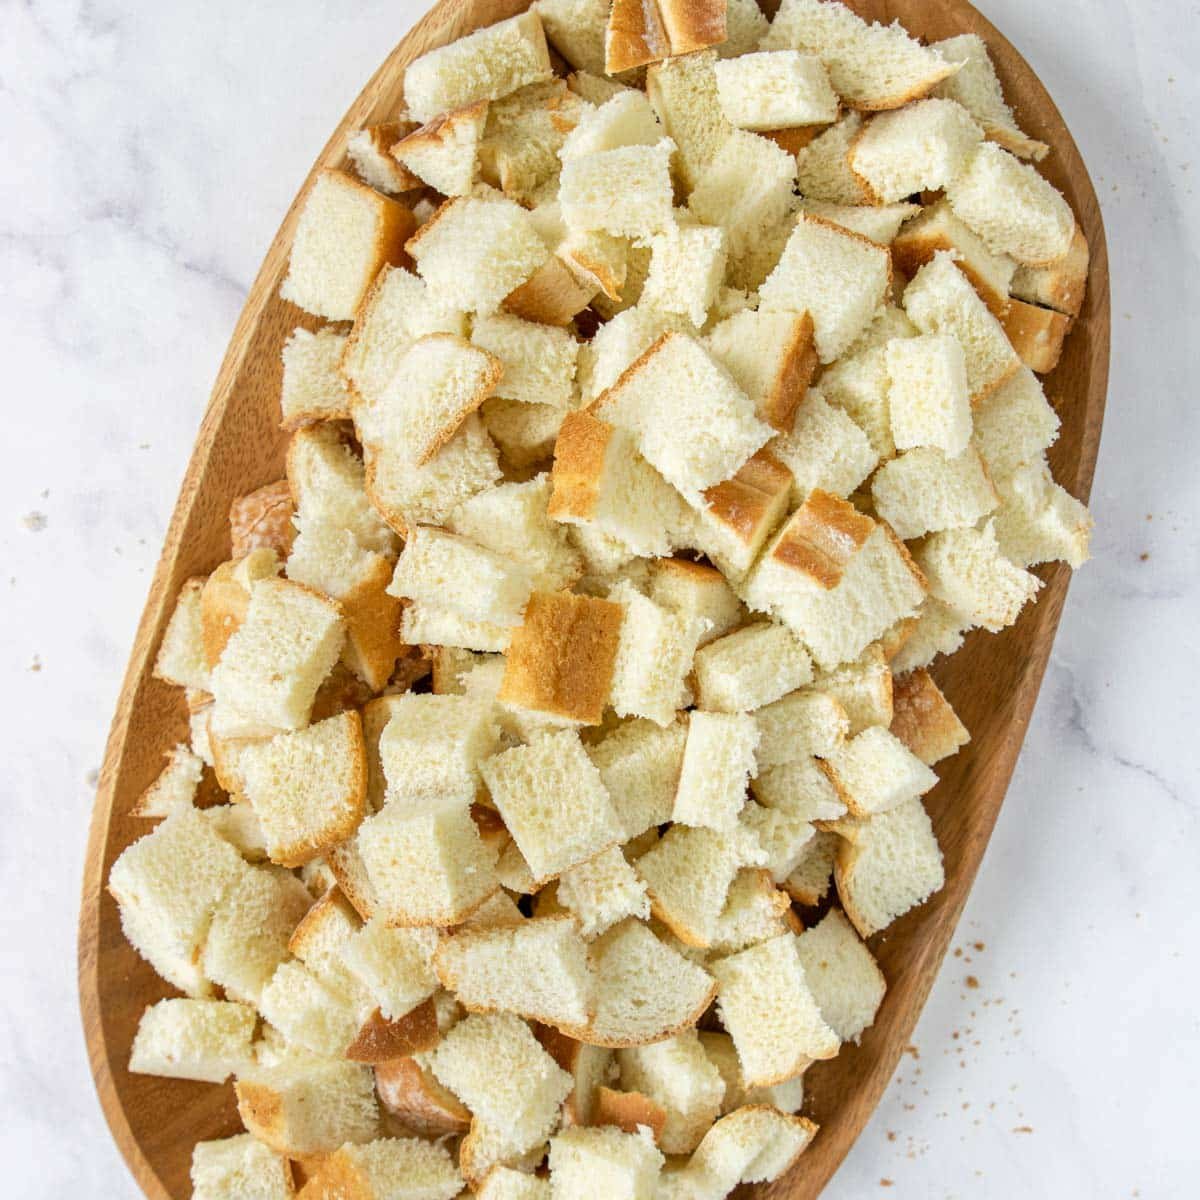 dried bread cubes in a dish